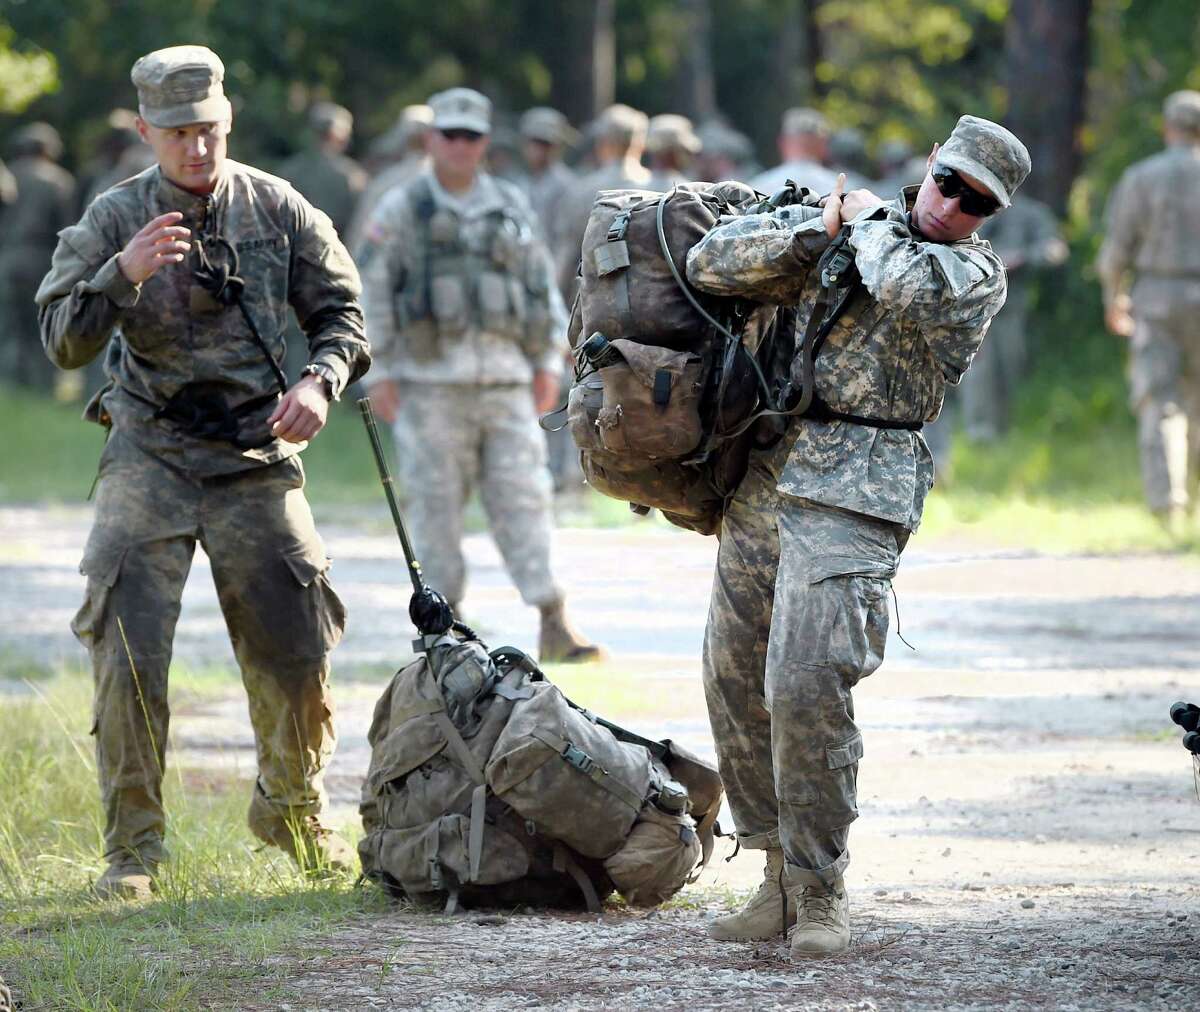 A female Army Ranger student lifts a rucksack onto her back on Tuesday, Aug. 4, 2015, at Camp James E. Rudder on Eglin Air Force Base, Fla. Two out of 19 females have made it to the final phase of Army Ranger training which ends at Camp James E. Rudder on Eglin Air Force Base. (Nick Tomecek/Northwest Florida Daily News via AP)